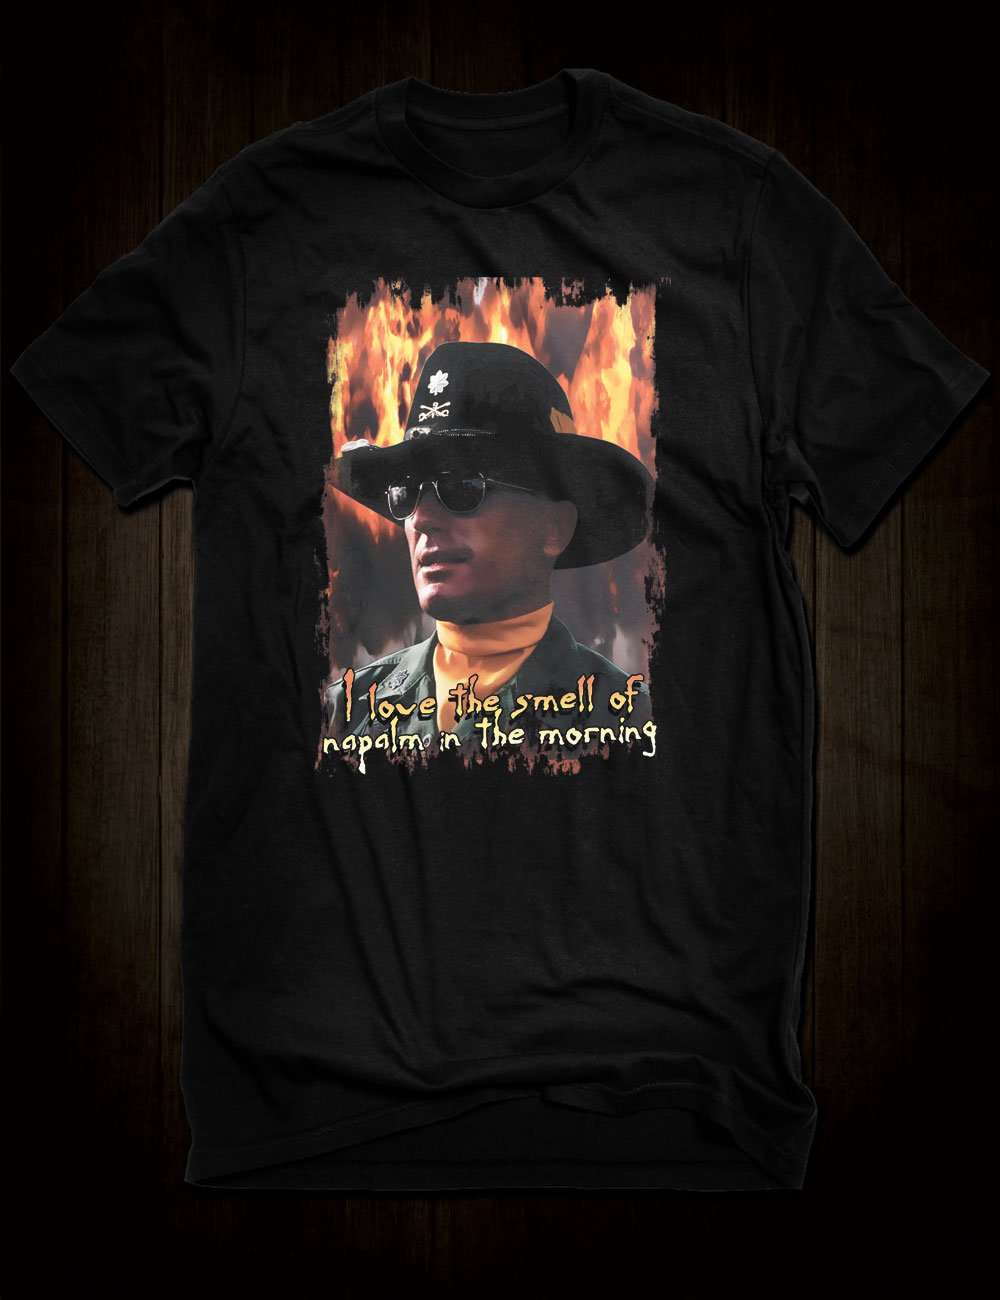 Apocalypse Now Quote T-Shirt from